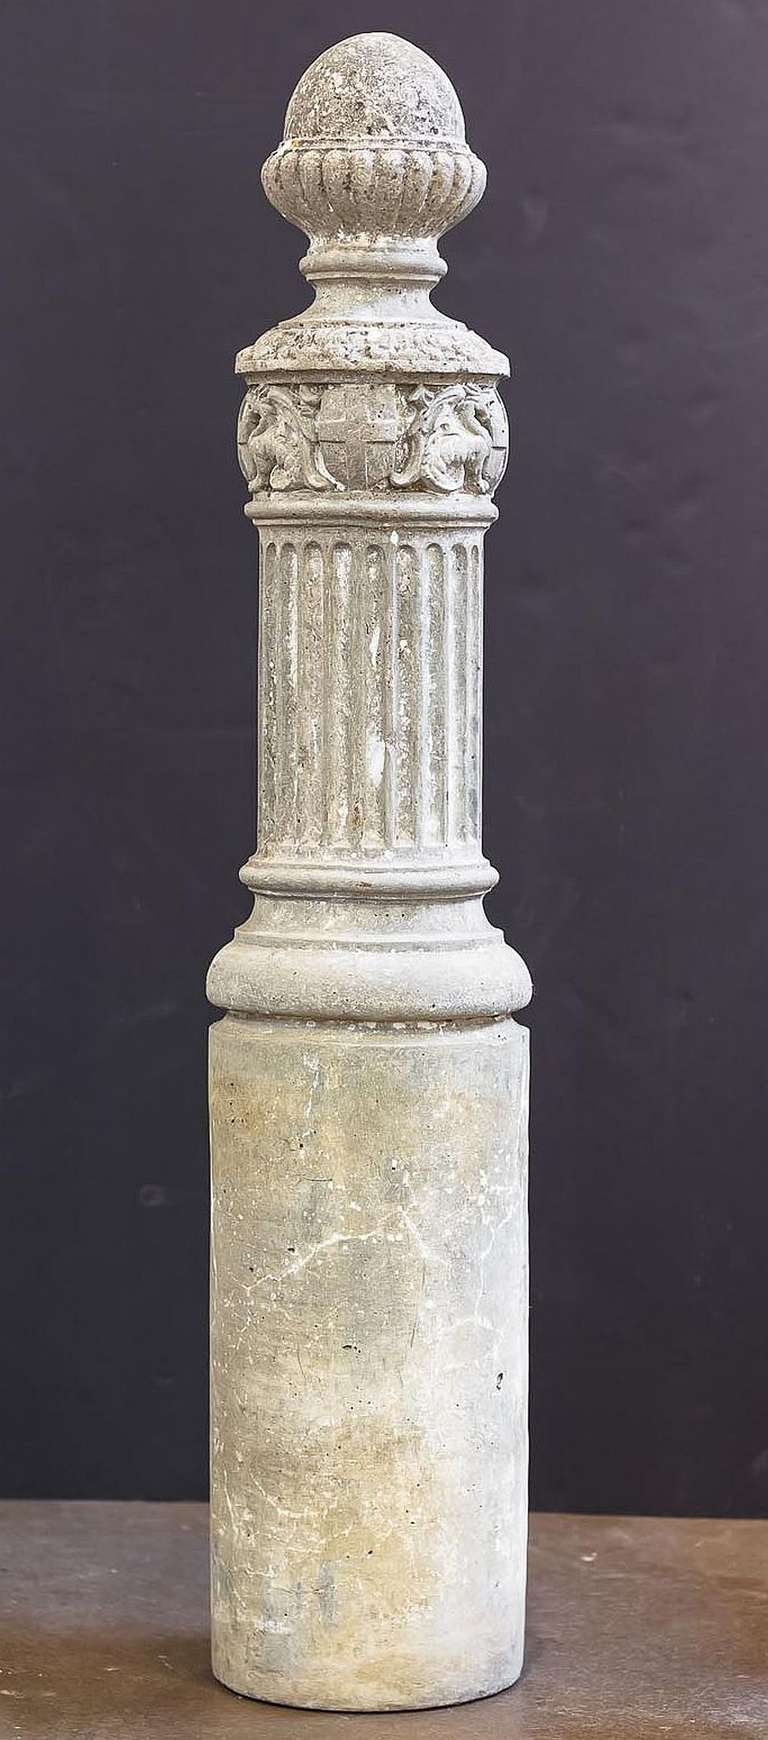 A large English garden stone column or pedestal designed for use a horse tethering post.